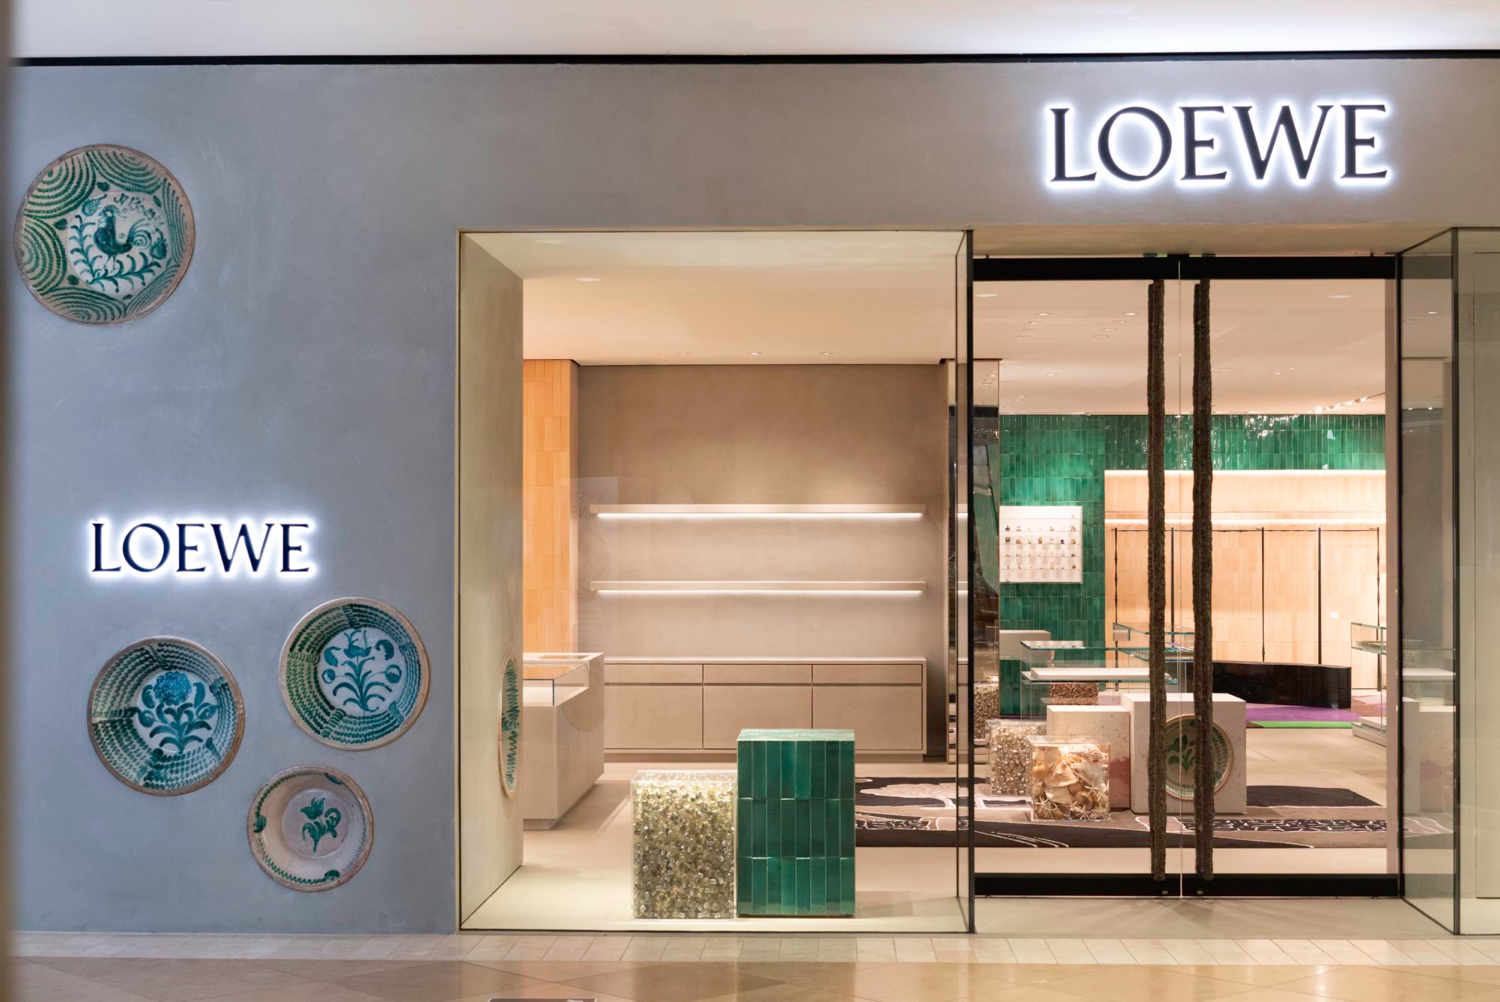 The First Les Parfums Louis Vuitton Pop-Up Store Opens at South Coast Plaza  in Costa Mesa